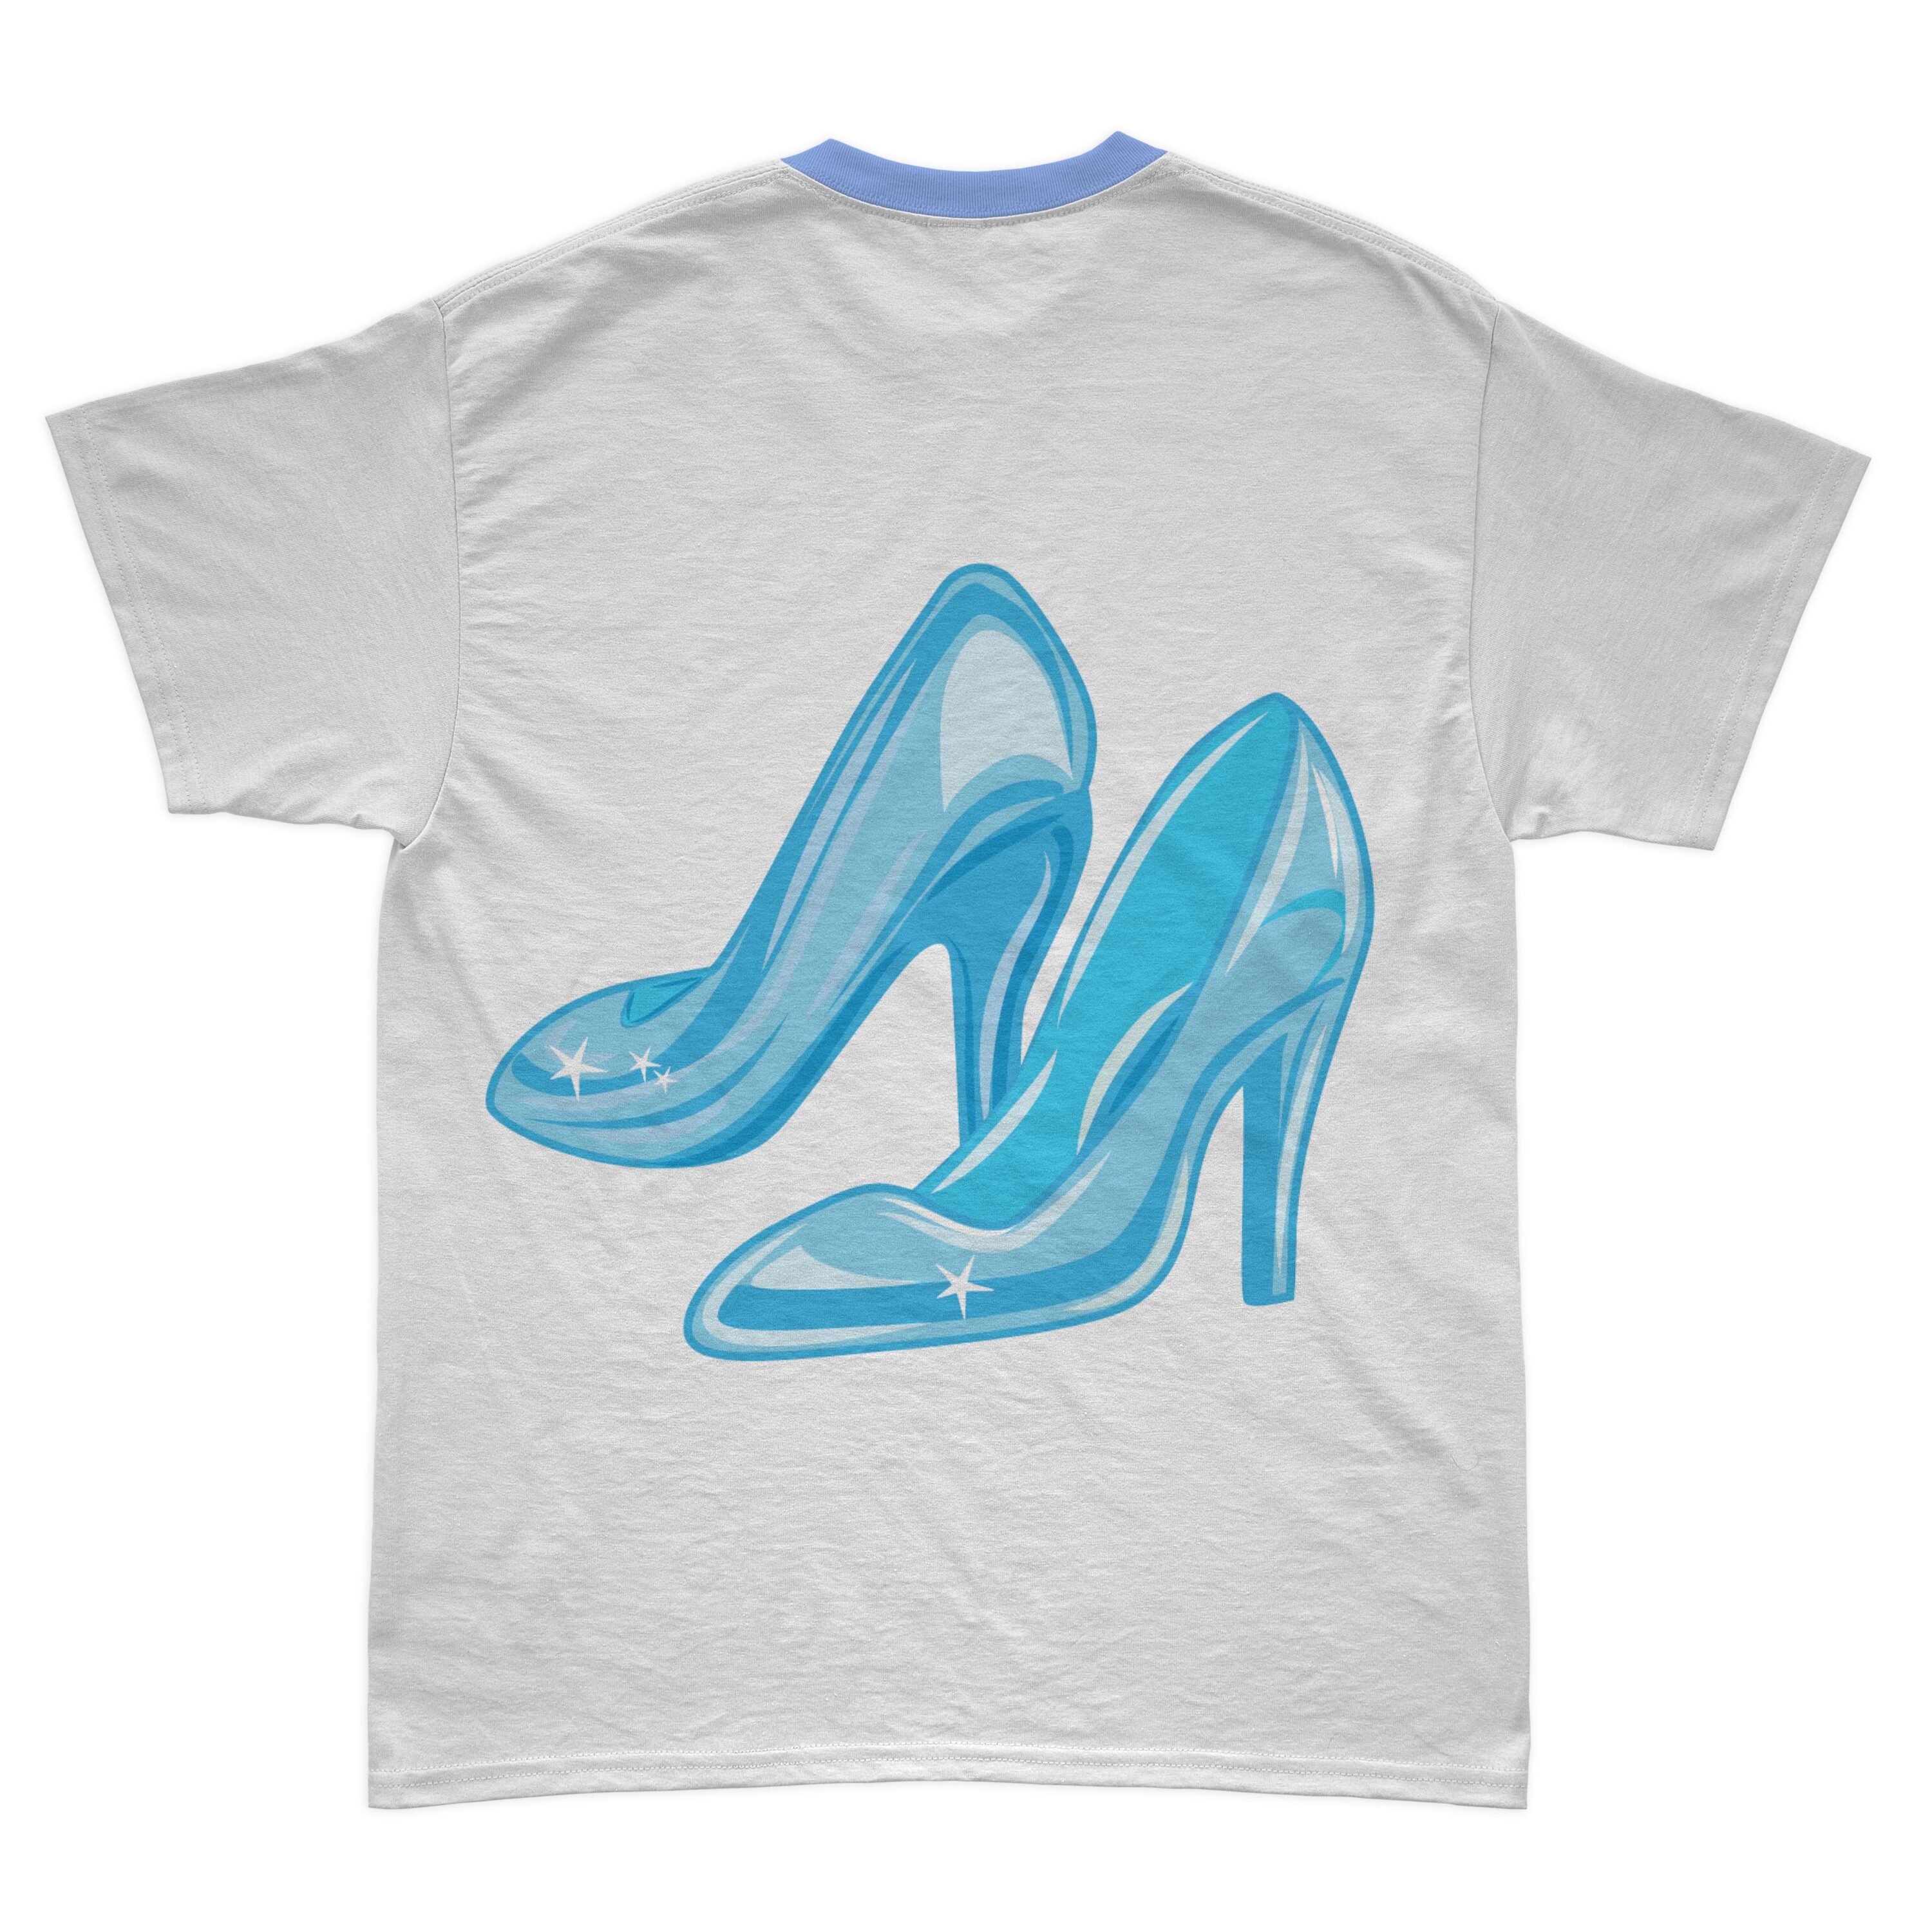 Picture of a white t-shirt with a cute print of Cinderella's crystal shoes.